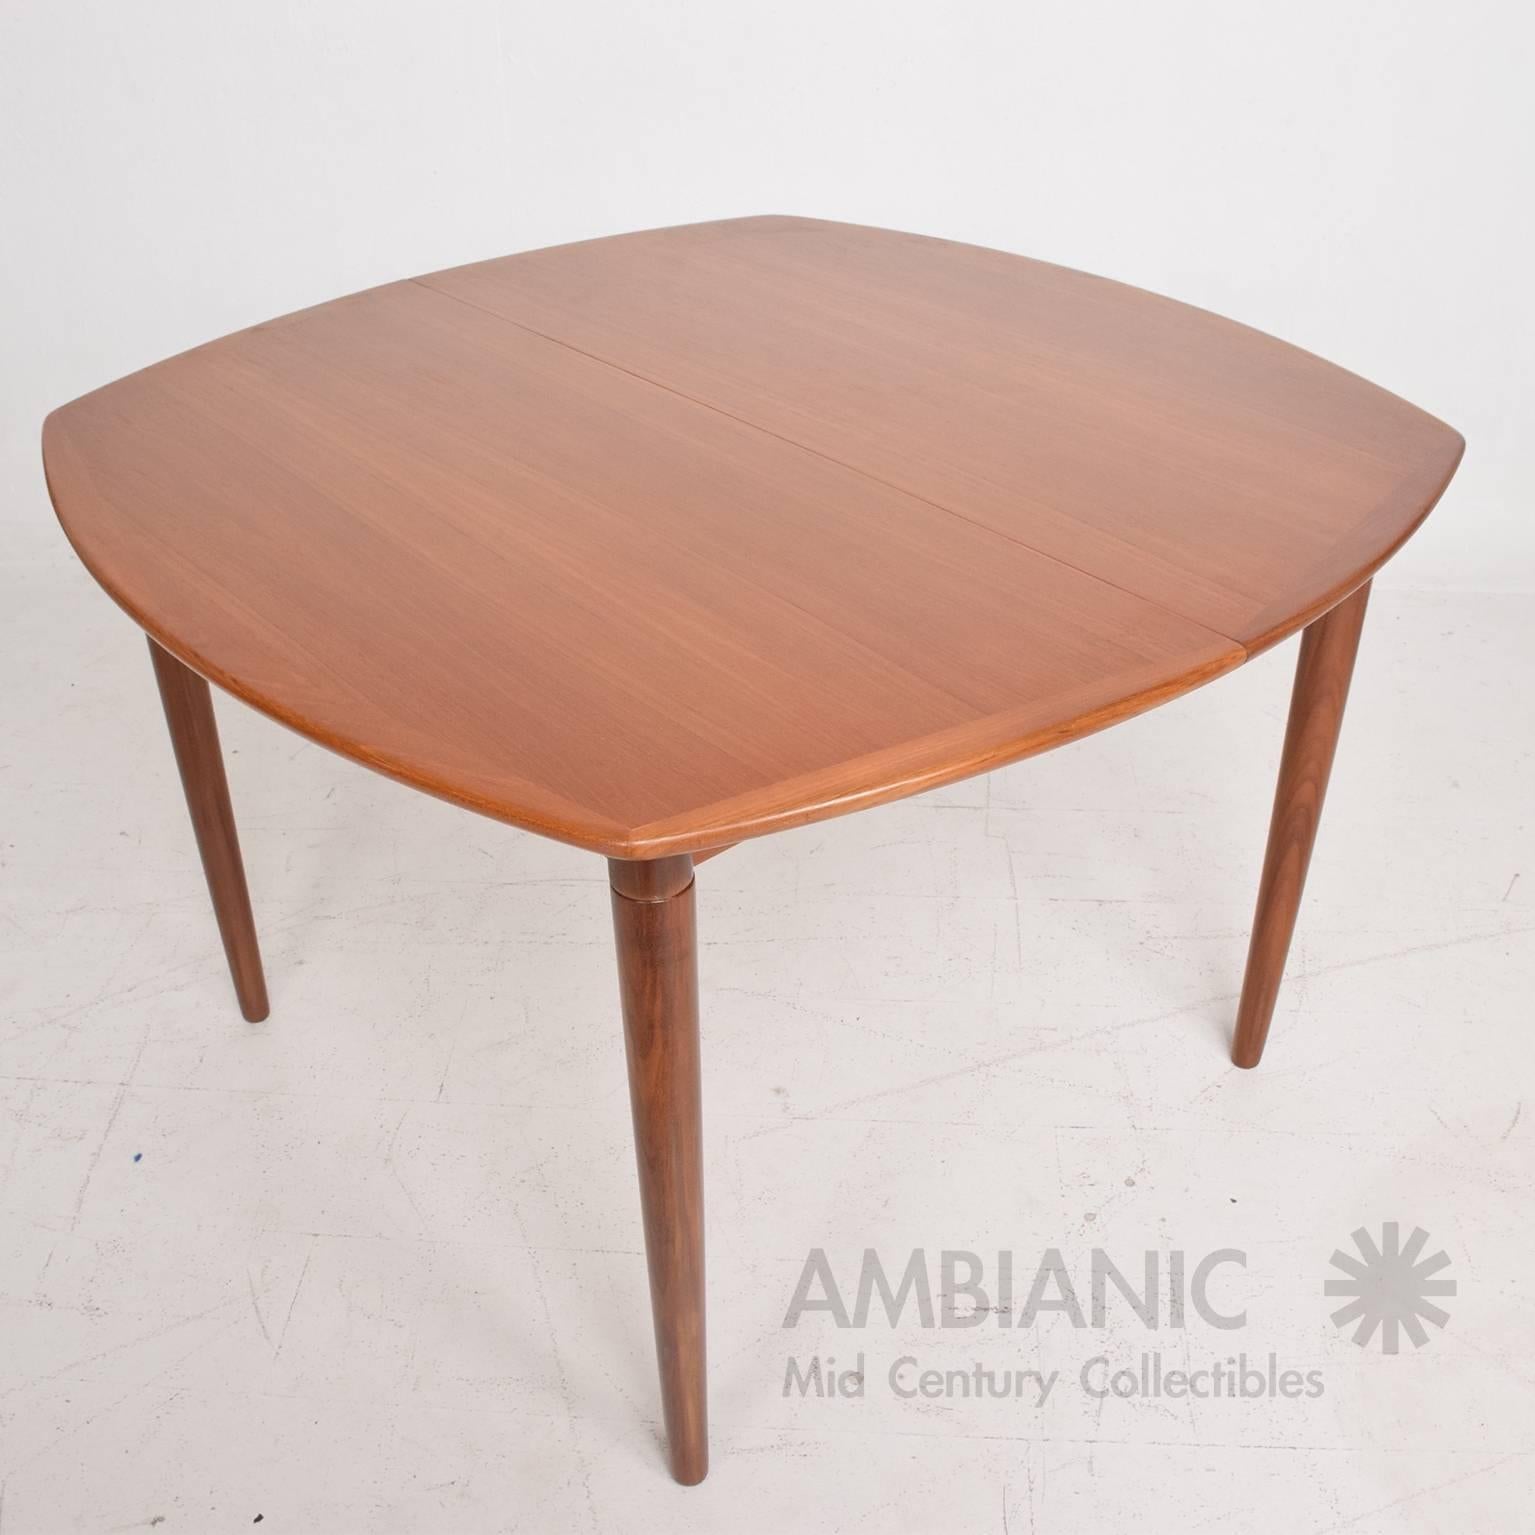 Mid-Century Modern Mid-Century Danish Modern Teak Dining Table with Two Extensions